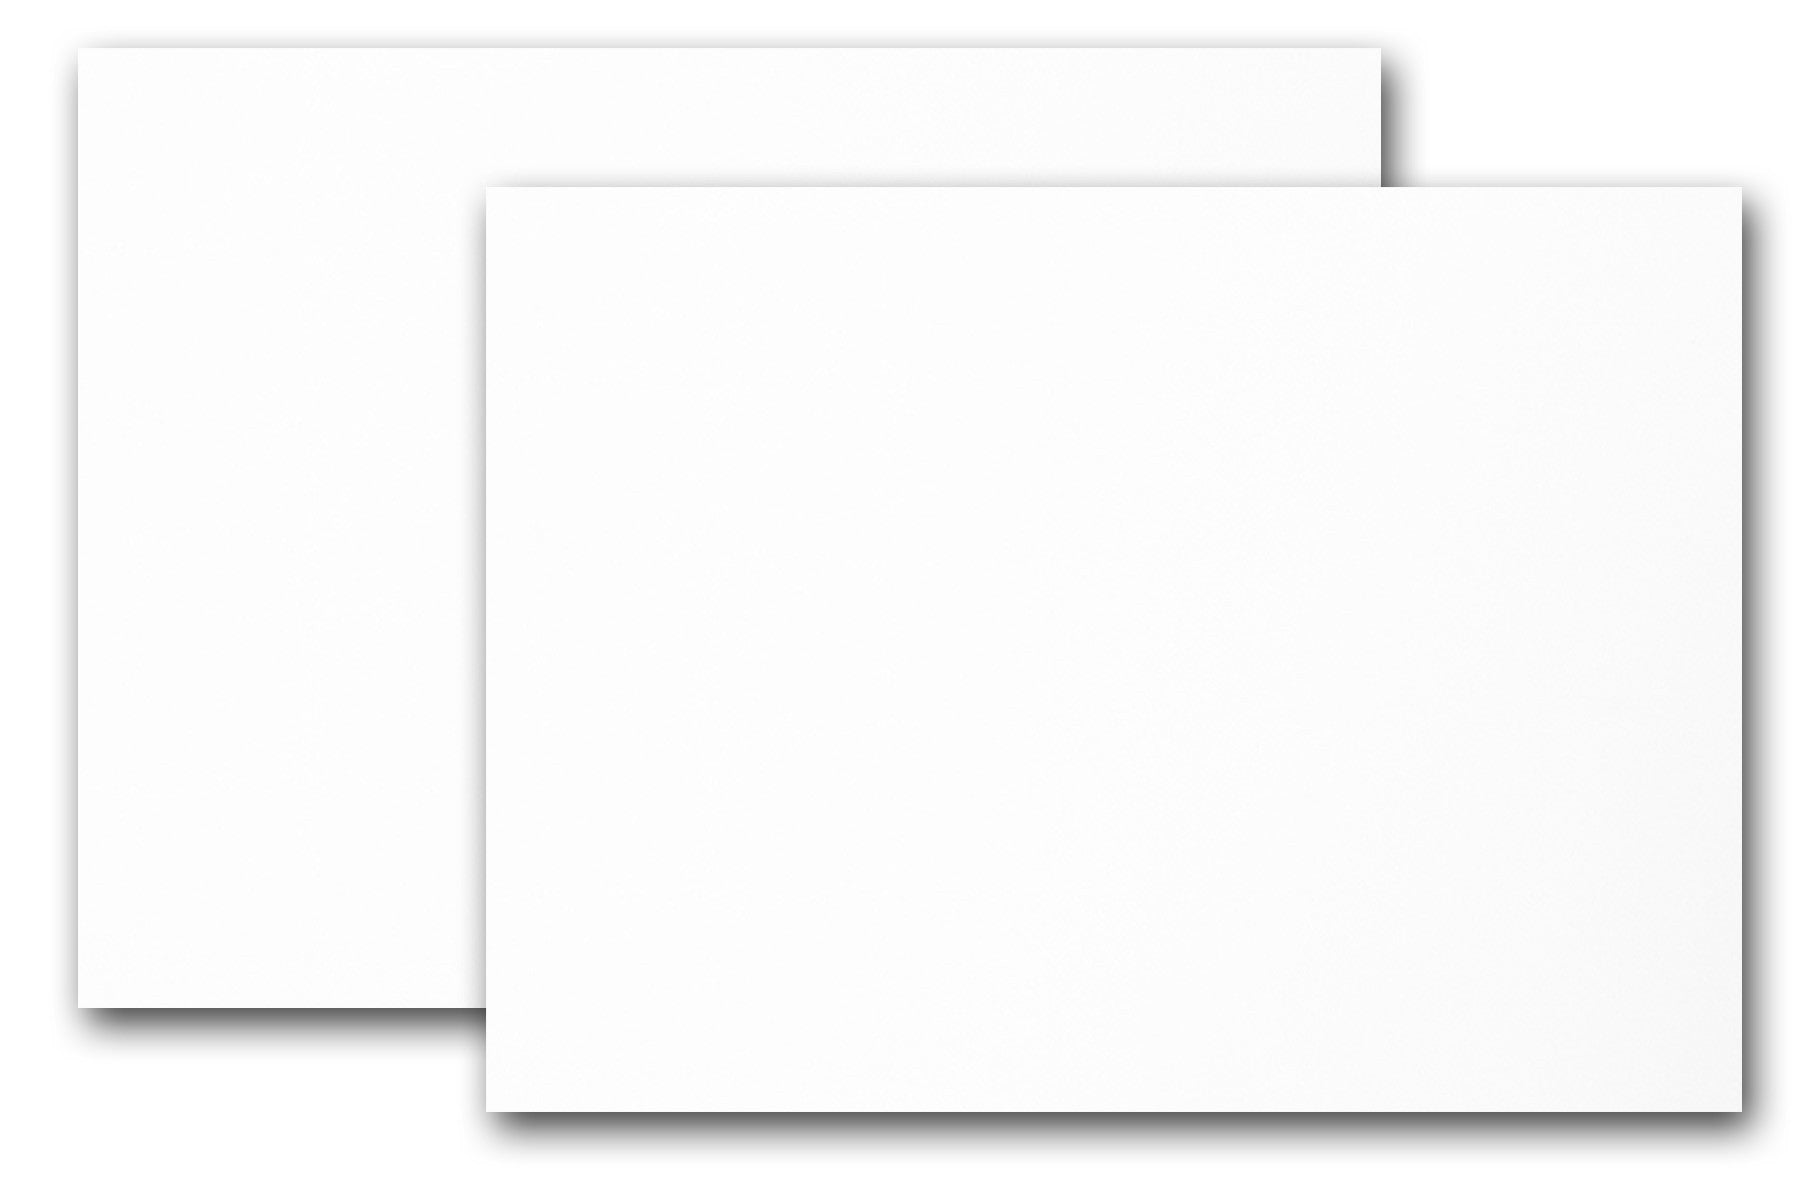 Blank Index Cards, 4 x 6, White, 100 Per Pack, 10 Packs